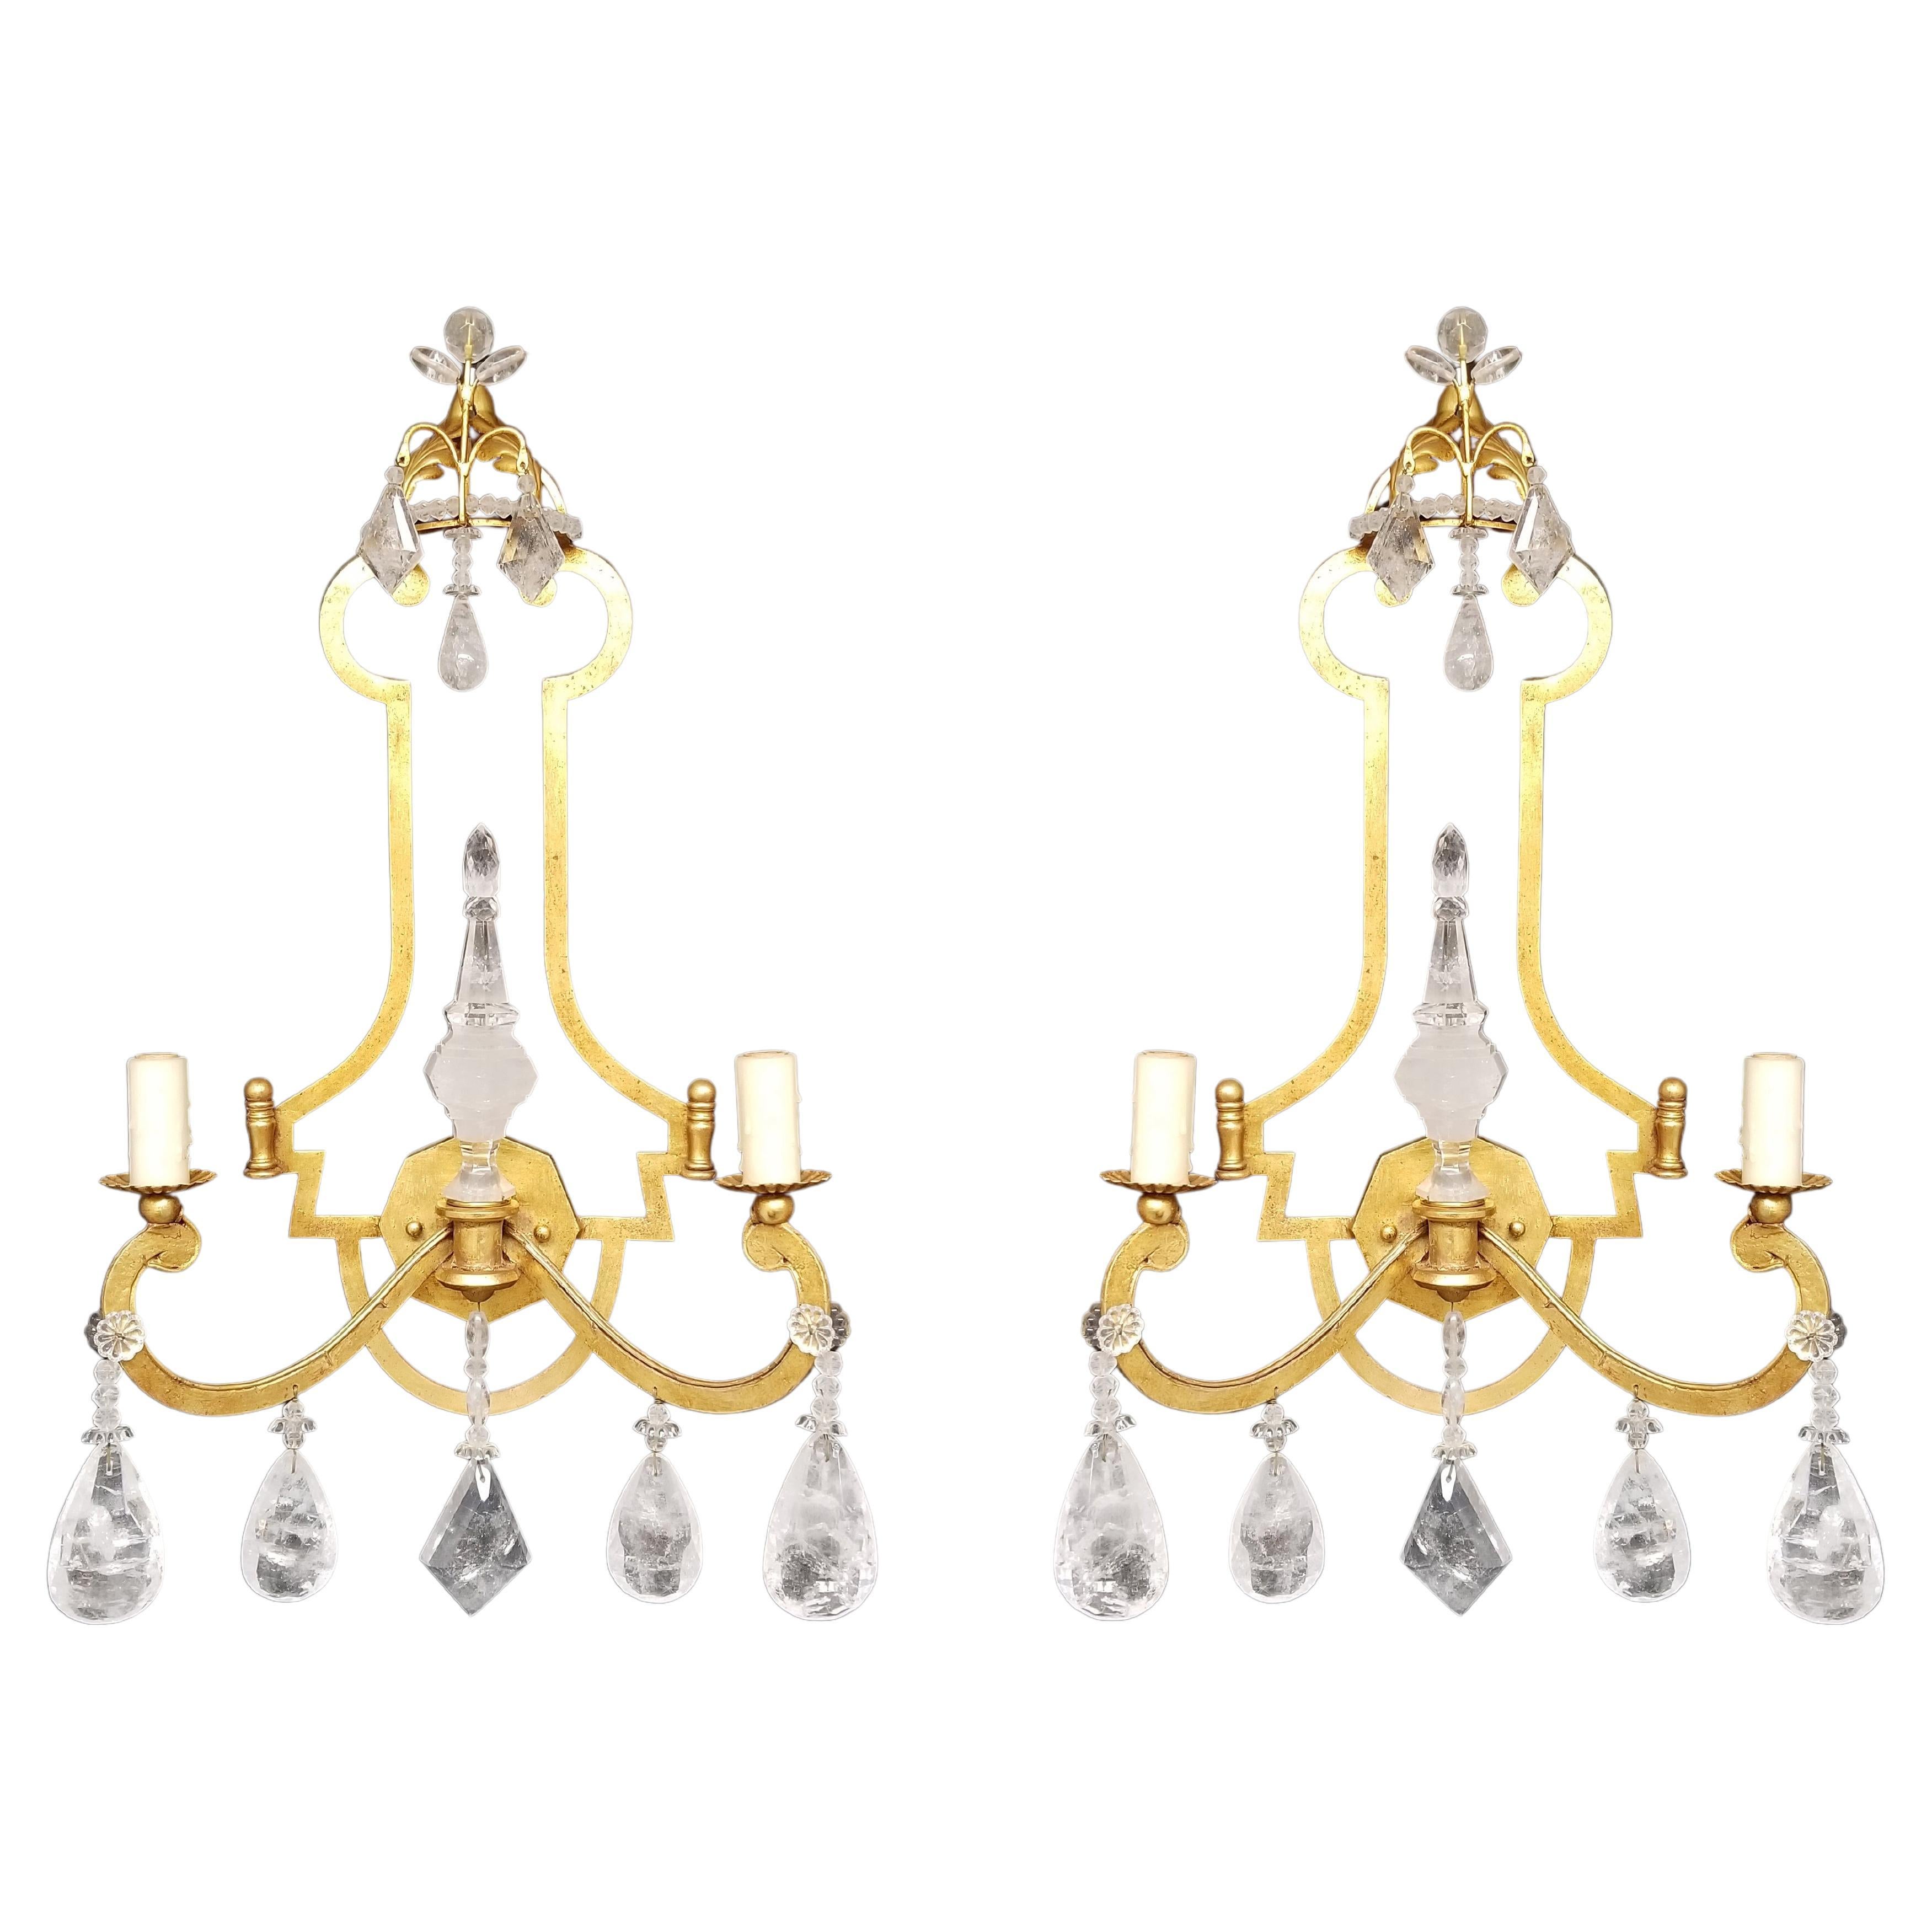 Pair of Rock Crystal Sconces with 22K Gold Leaf